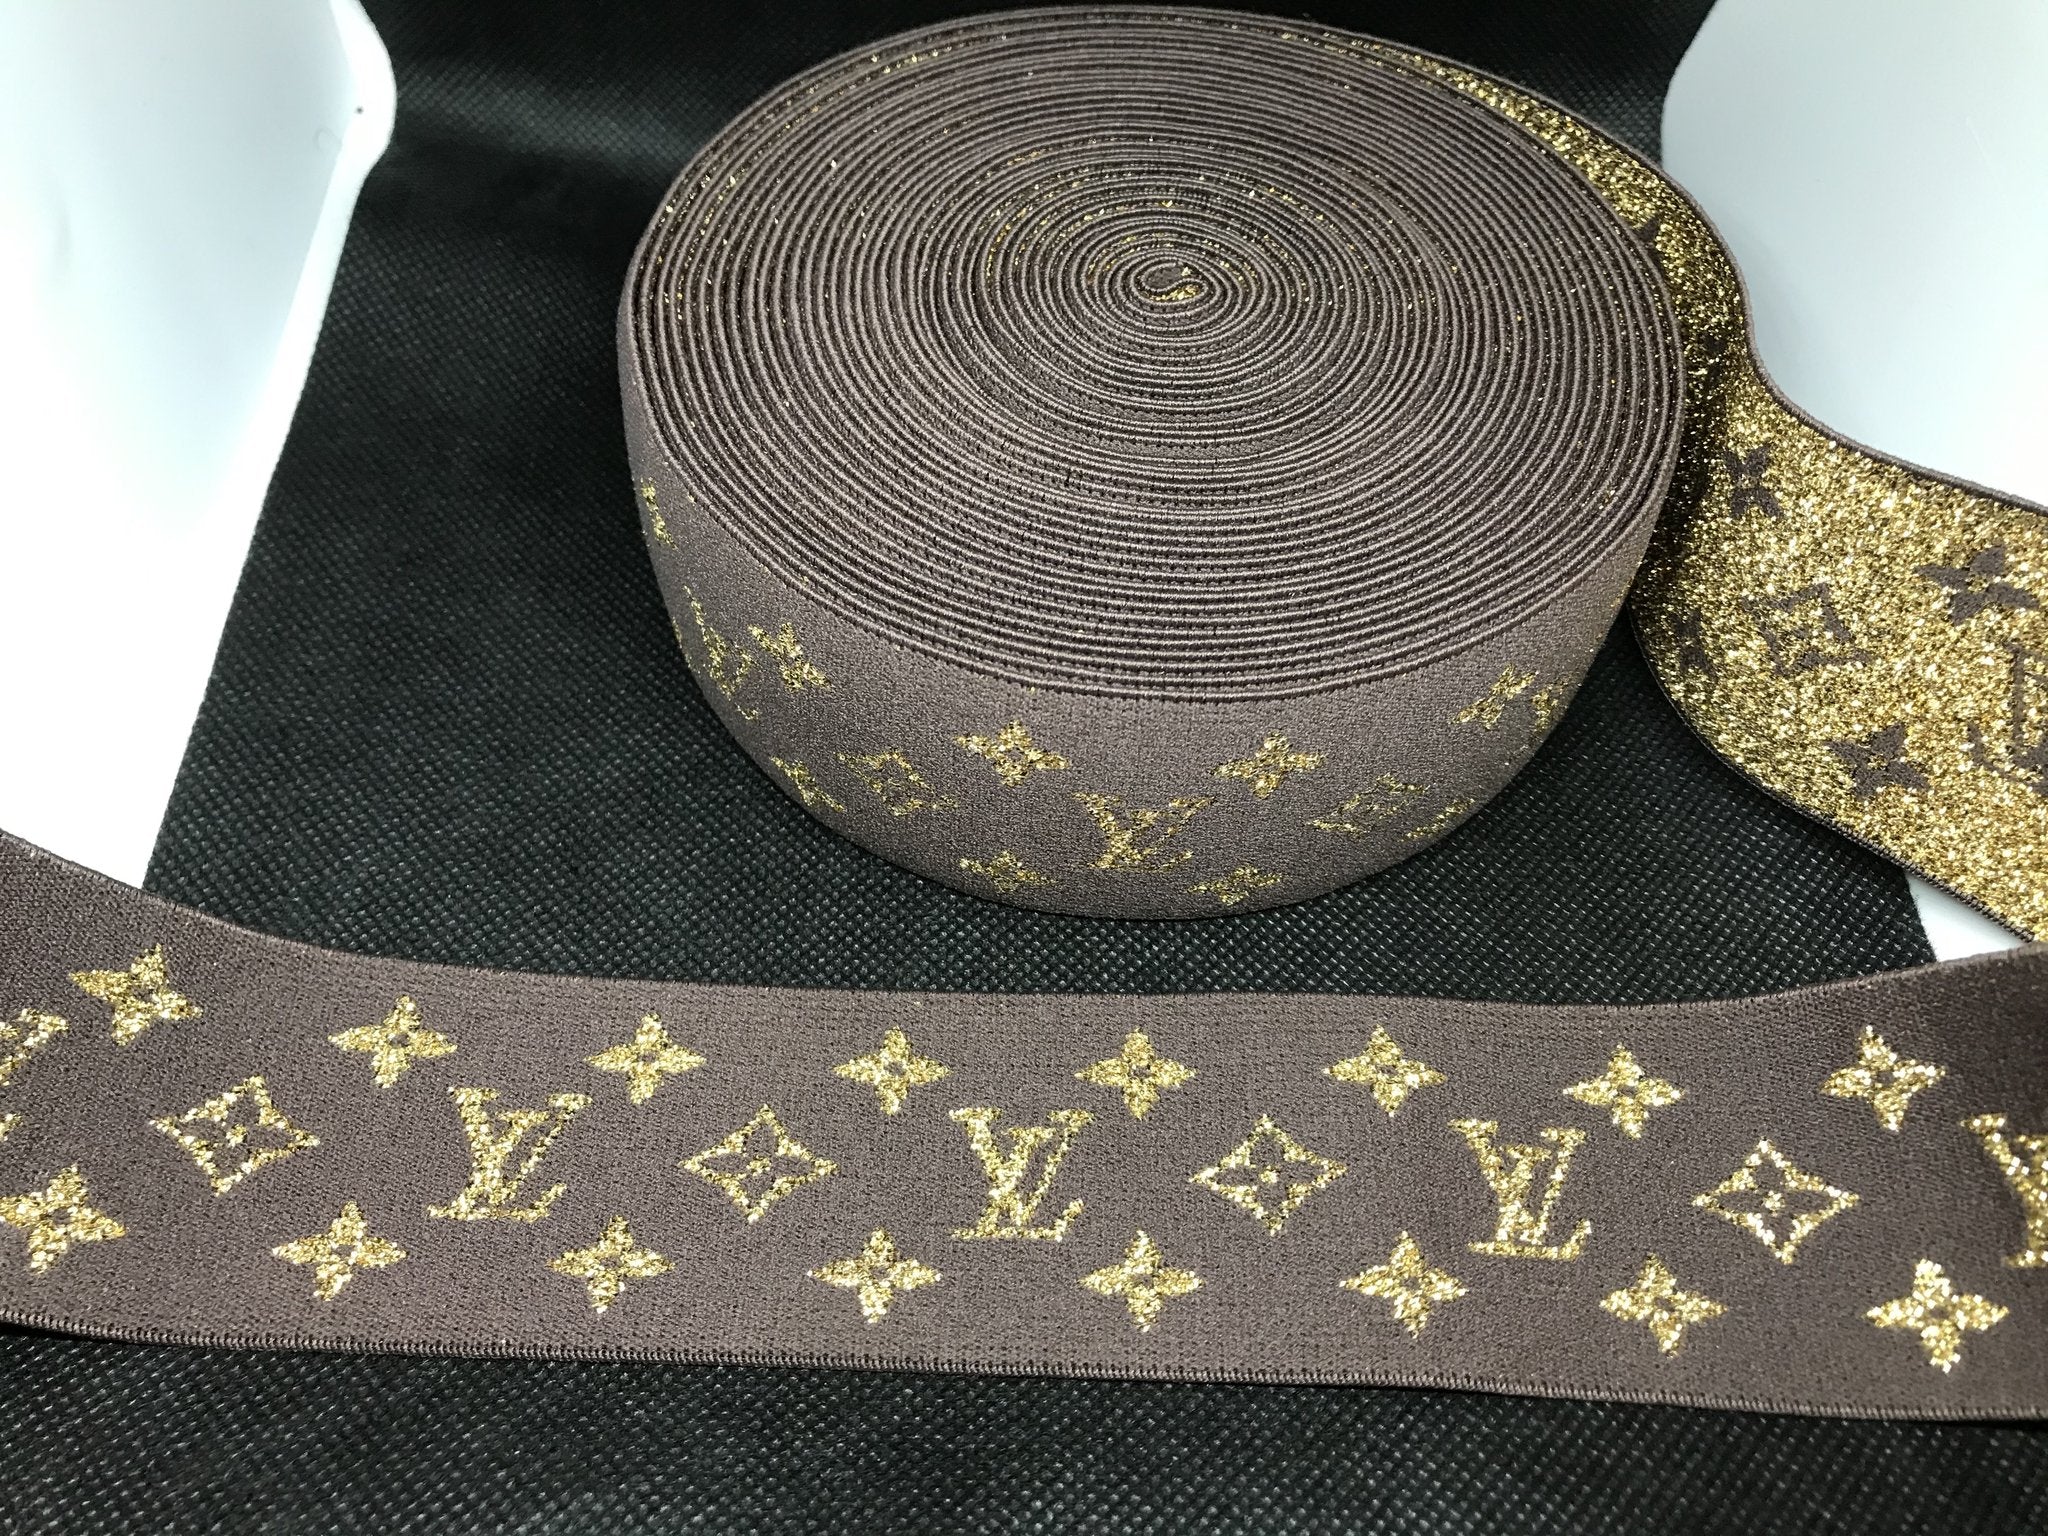 Louis Vuitton Fabric for Sale, LV fabric by the yard & roll